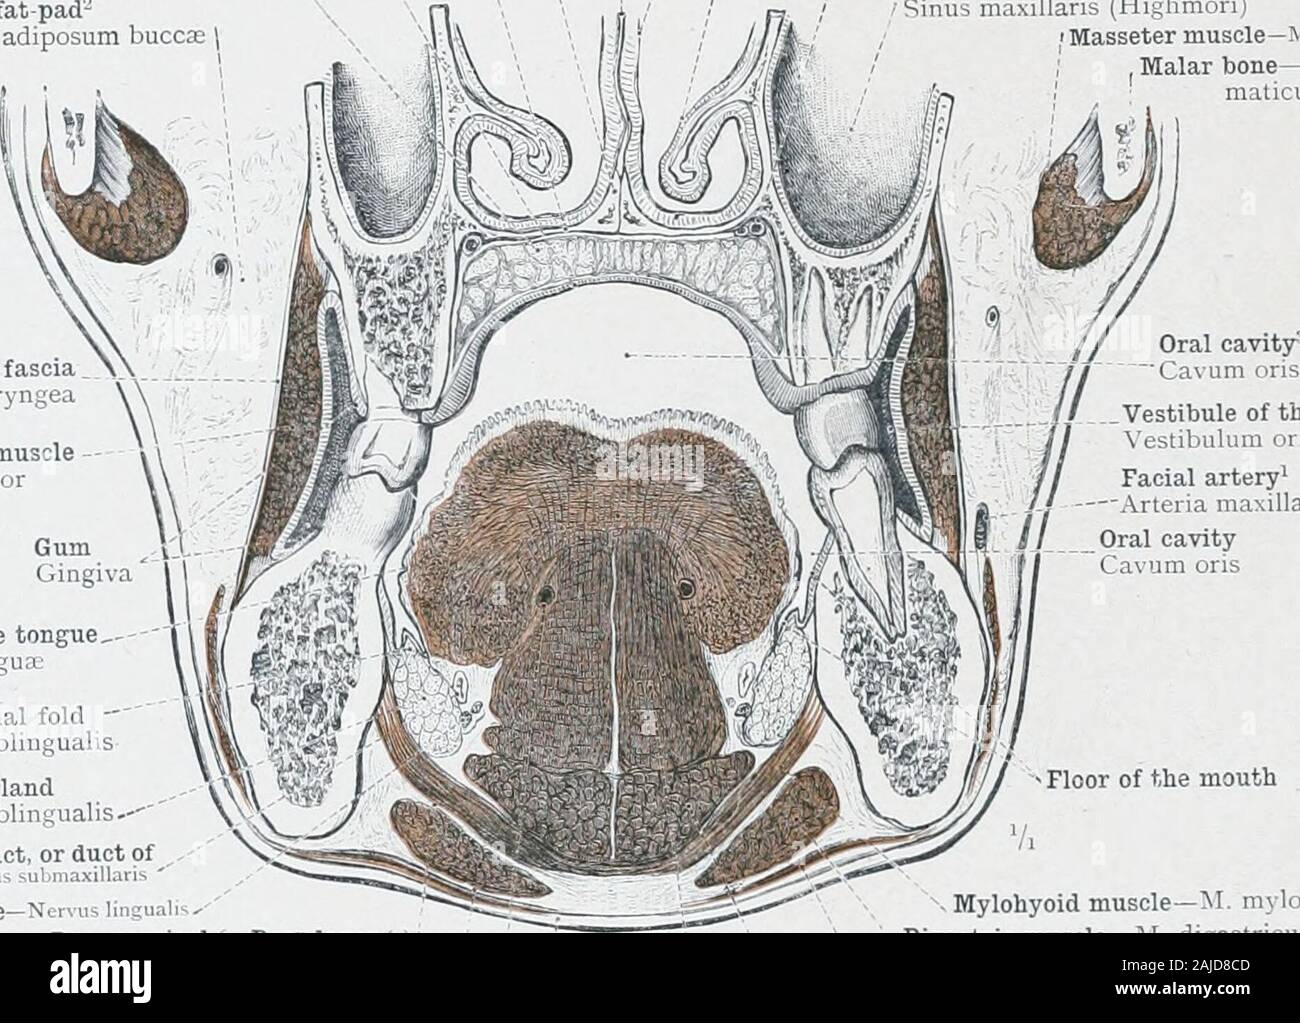 An atlas of human anatomy for students and physicians . from Before. On the left side the buccinator muscle has not been removed.Labia oris—The lips. 414 CEPHALIC AND CERVICAL PORTIONS OF THE DIGESTIVE ORGANS The vomer VomerNasal crest of the superior maxillary bone-Crista nasalis,Palatine process of the superior maxillary bone ^Irocessus palatinus maxillavMucous membrane of the hard palate alatine glands—GlanduL-e palatinasBuccal fat pad-Corpus adiposum buccae Septum of the nose—Septum nasi Inferior turbinate bone—Concha nasalis inferior/ . Superior or descending palatine artery /Arteria pal Stock Photo